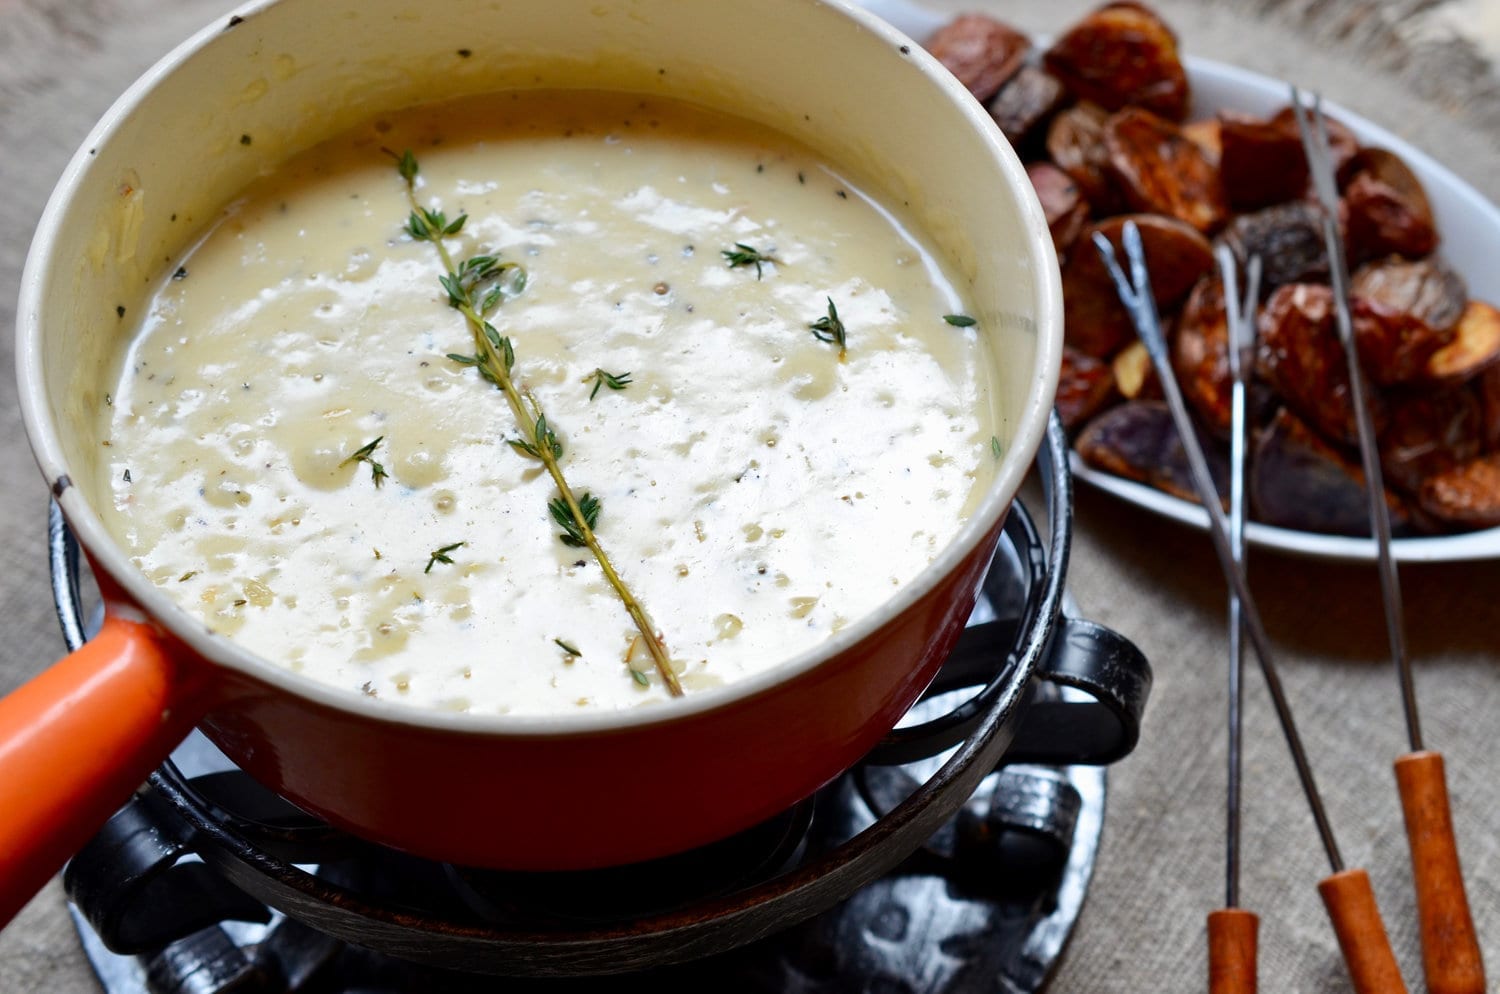 How to Make Perfect Gruyère Fondue (no special pot needed) - Wine 365